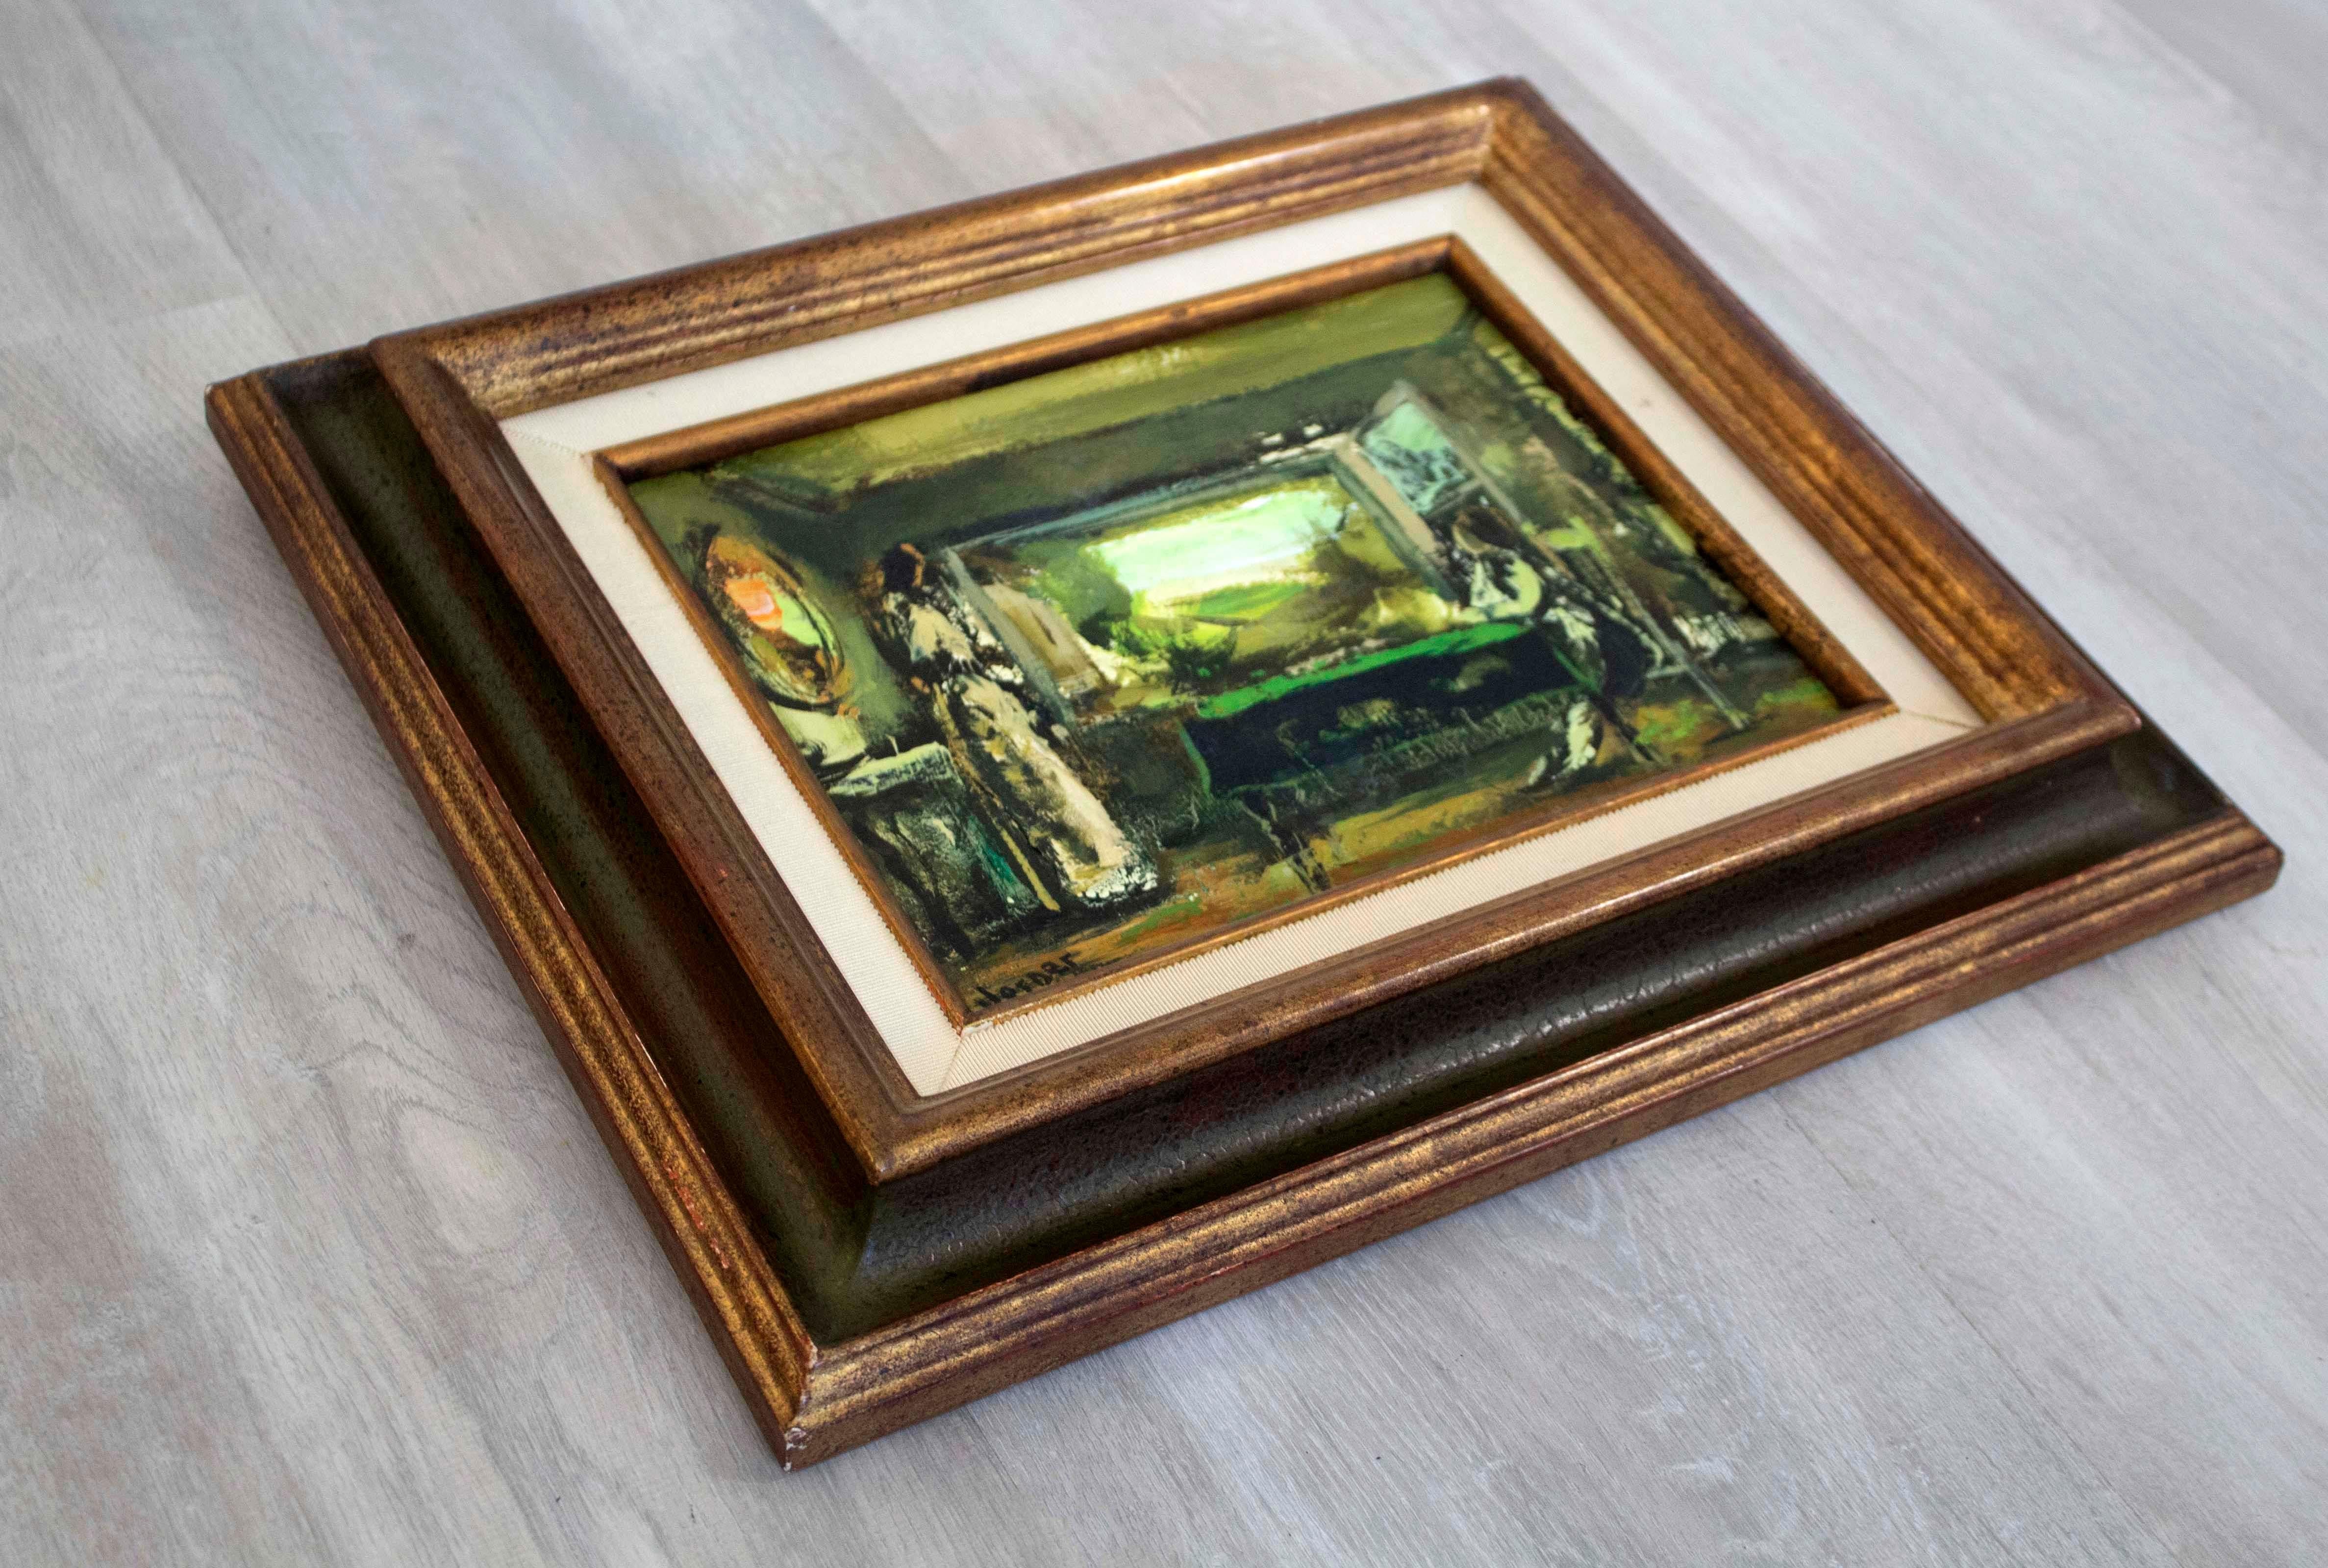 20th Century Mid-Century Modern Framed Verner Signed Oil Painting on Wood